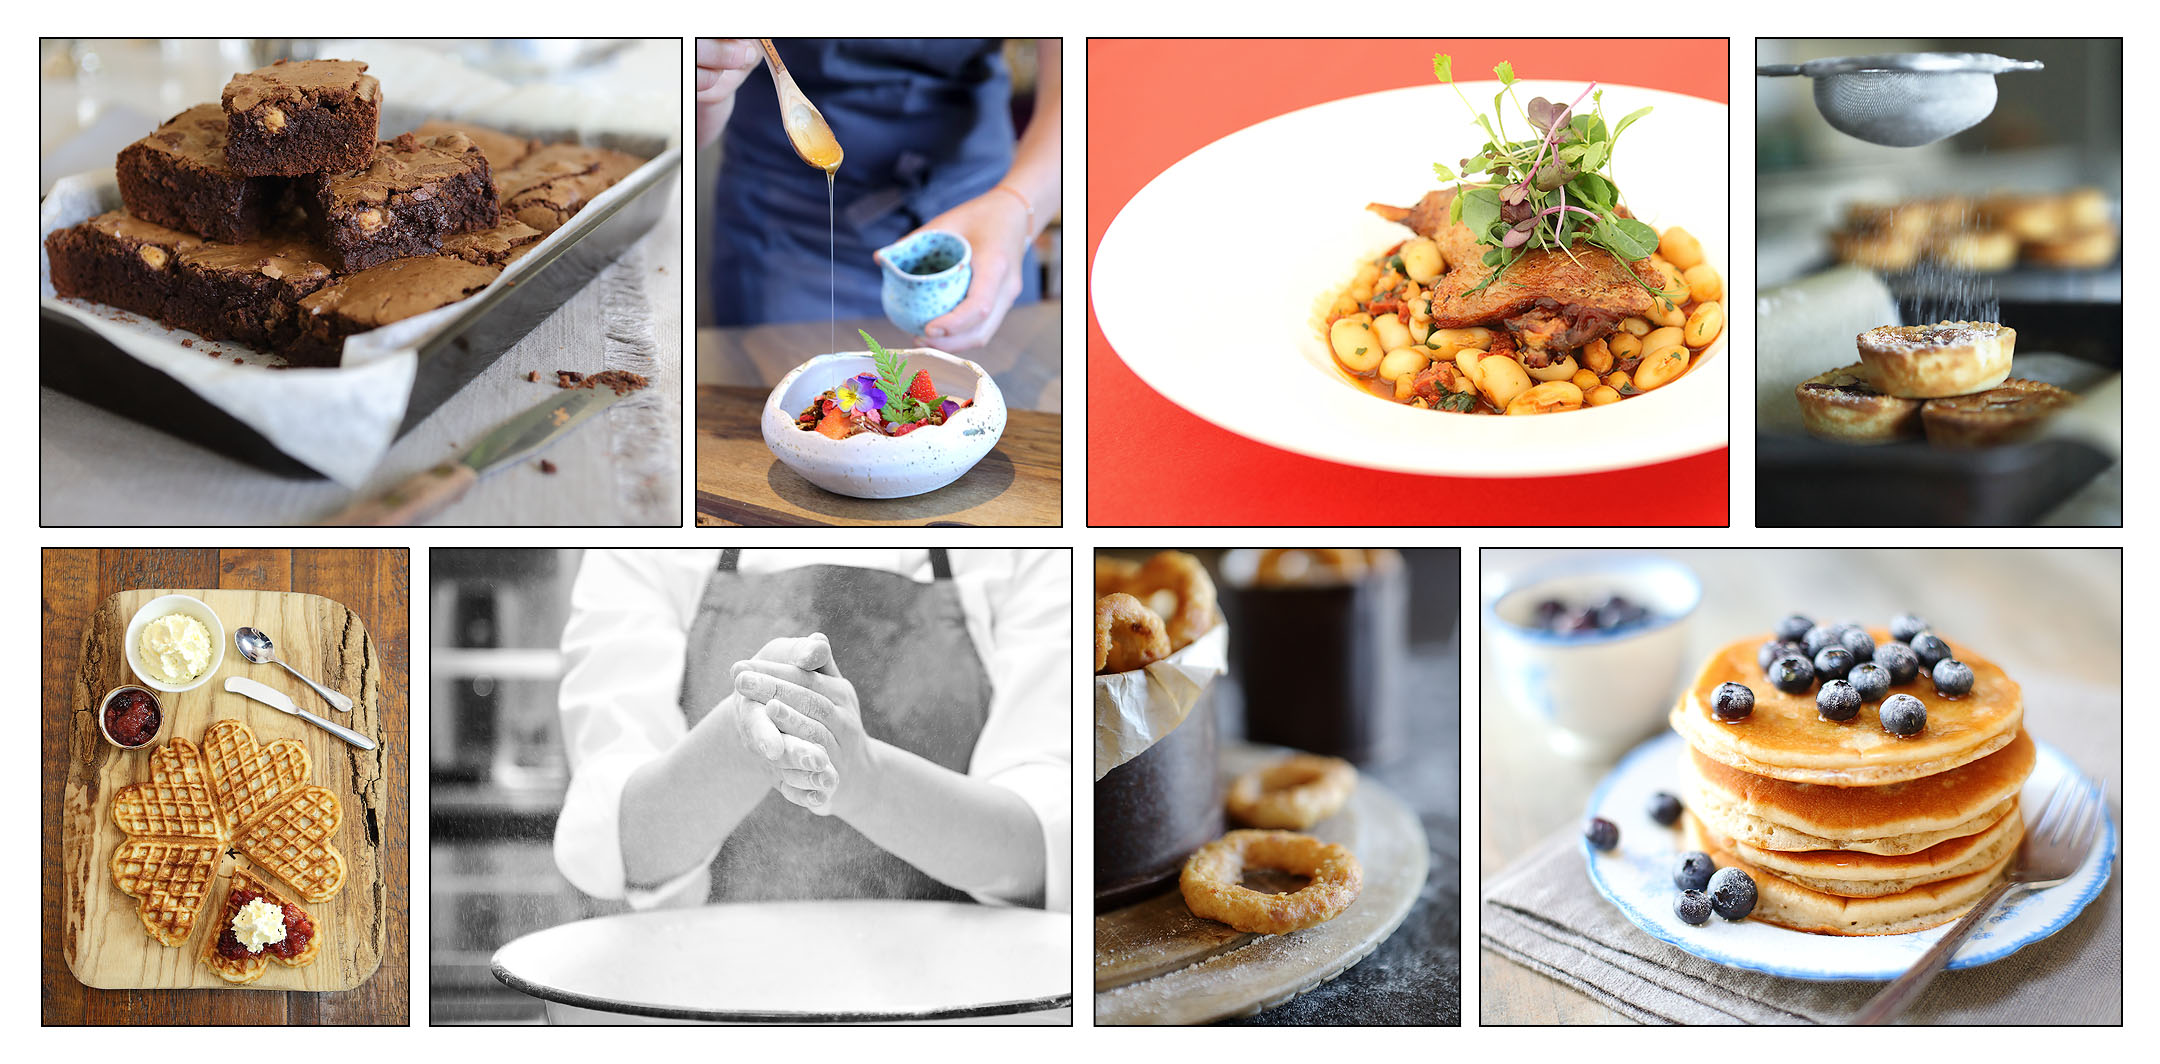 Editorial Food Photography In Leeds, York, Harrogate, Bradford and Manchester Areas